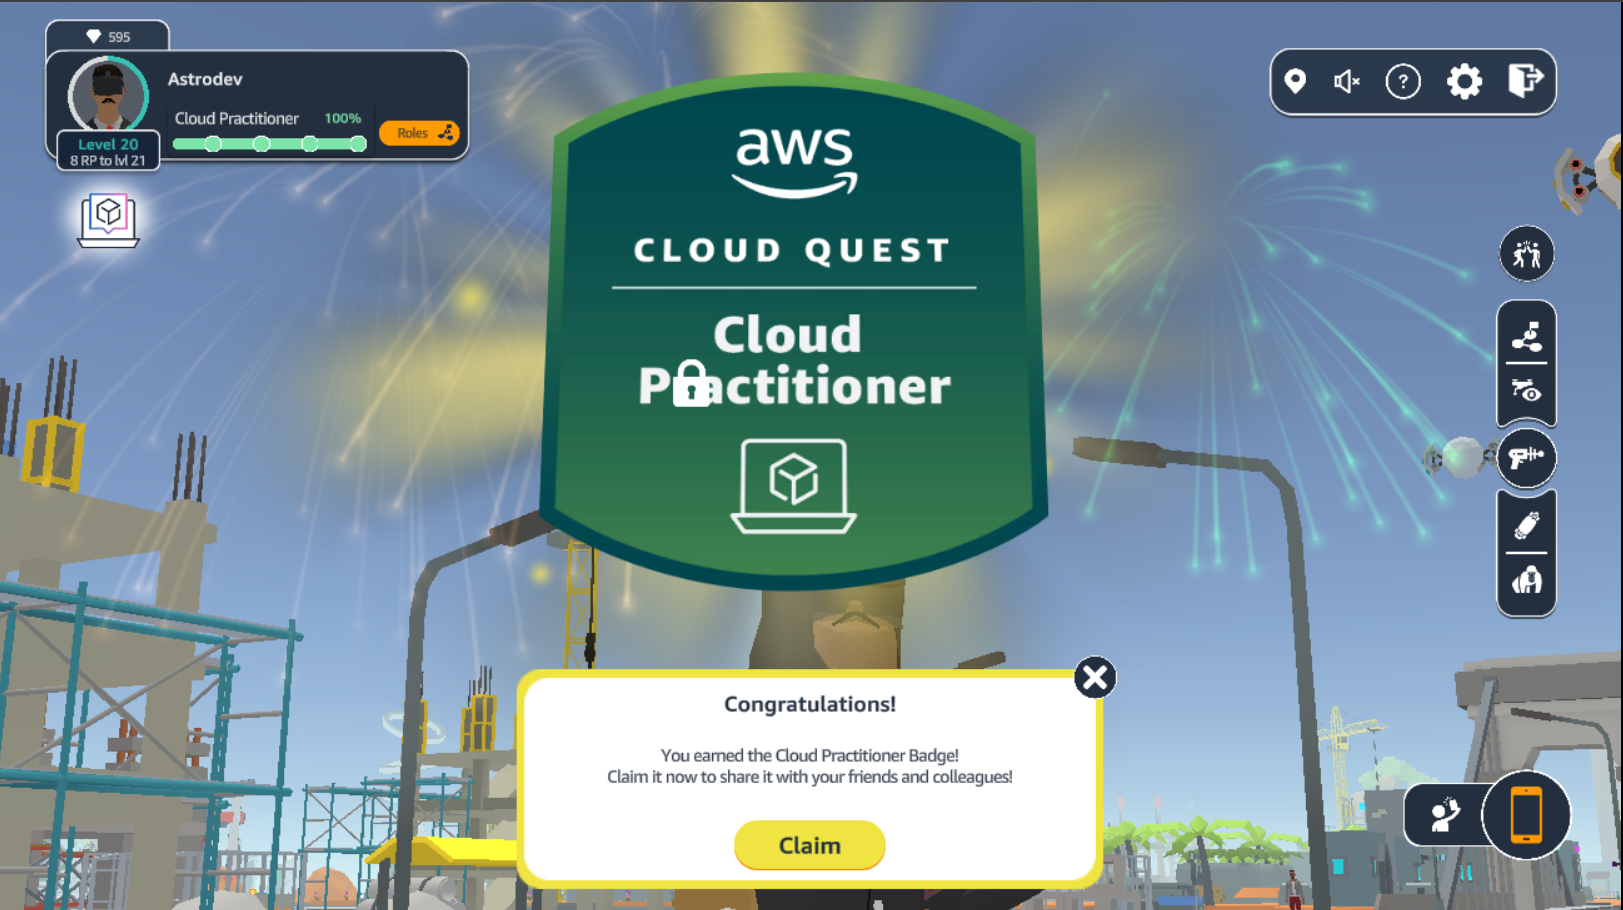 /img/img-posts/aws-cloud-quest/cloudquest-claim-badge.png